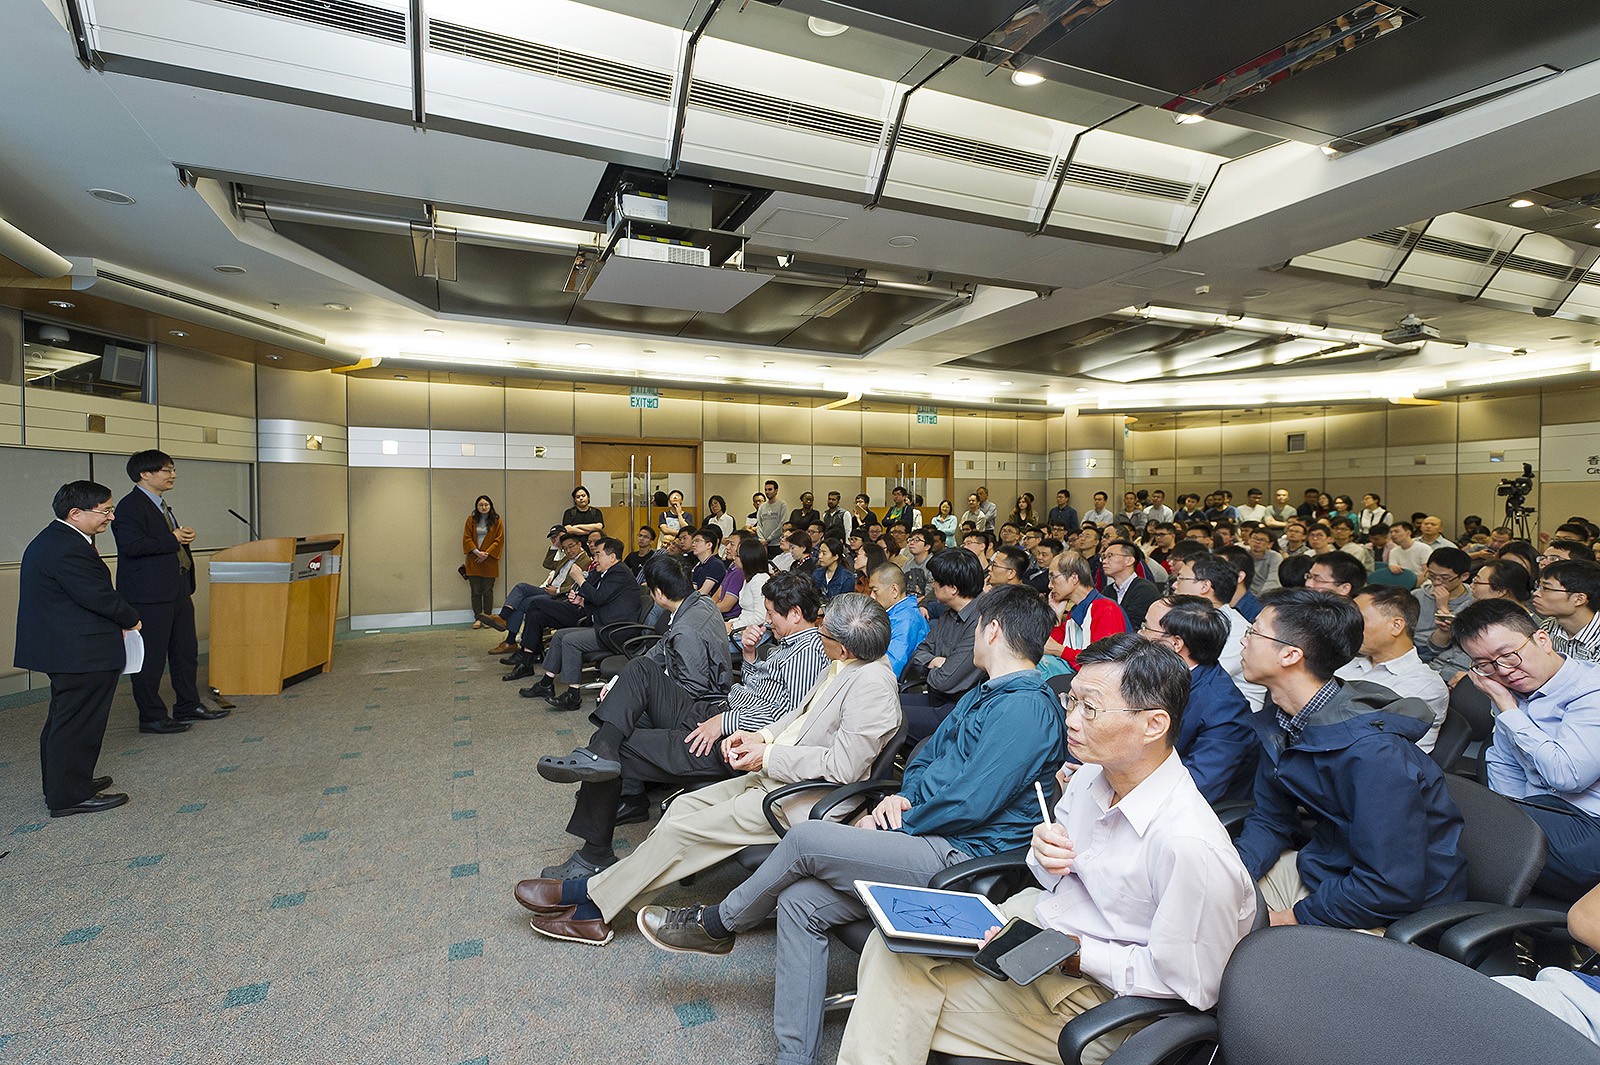 The lecture was titled “Nature-inspired Innovation: Art, Science and Technology”.